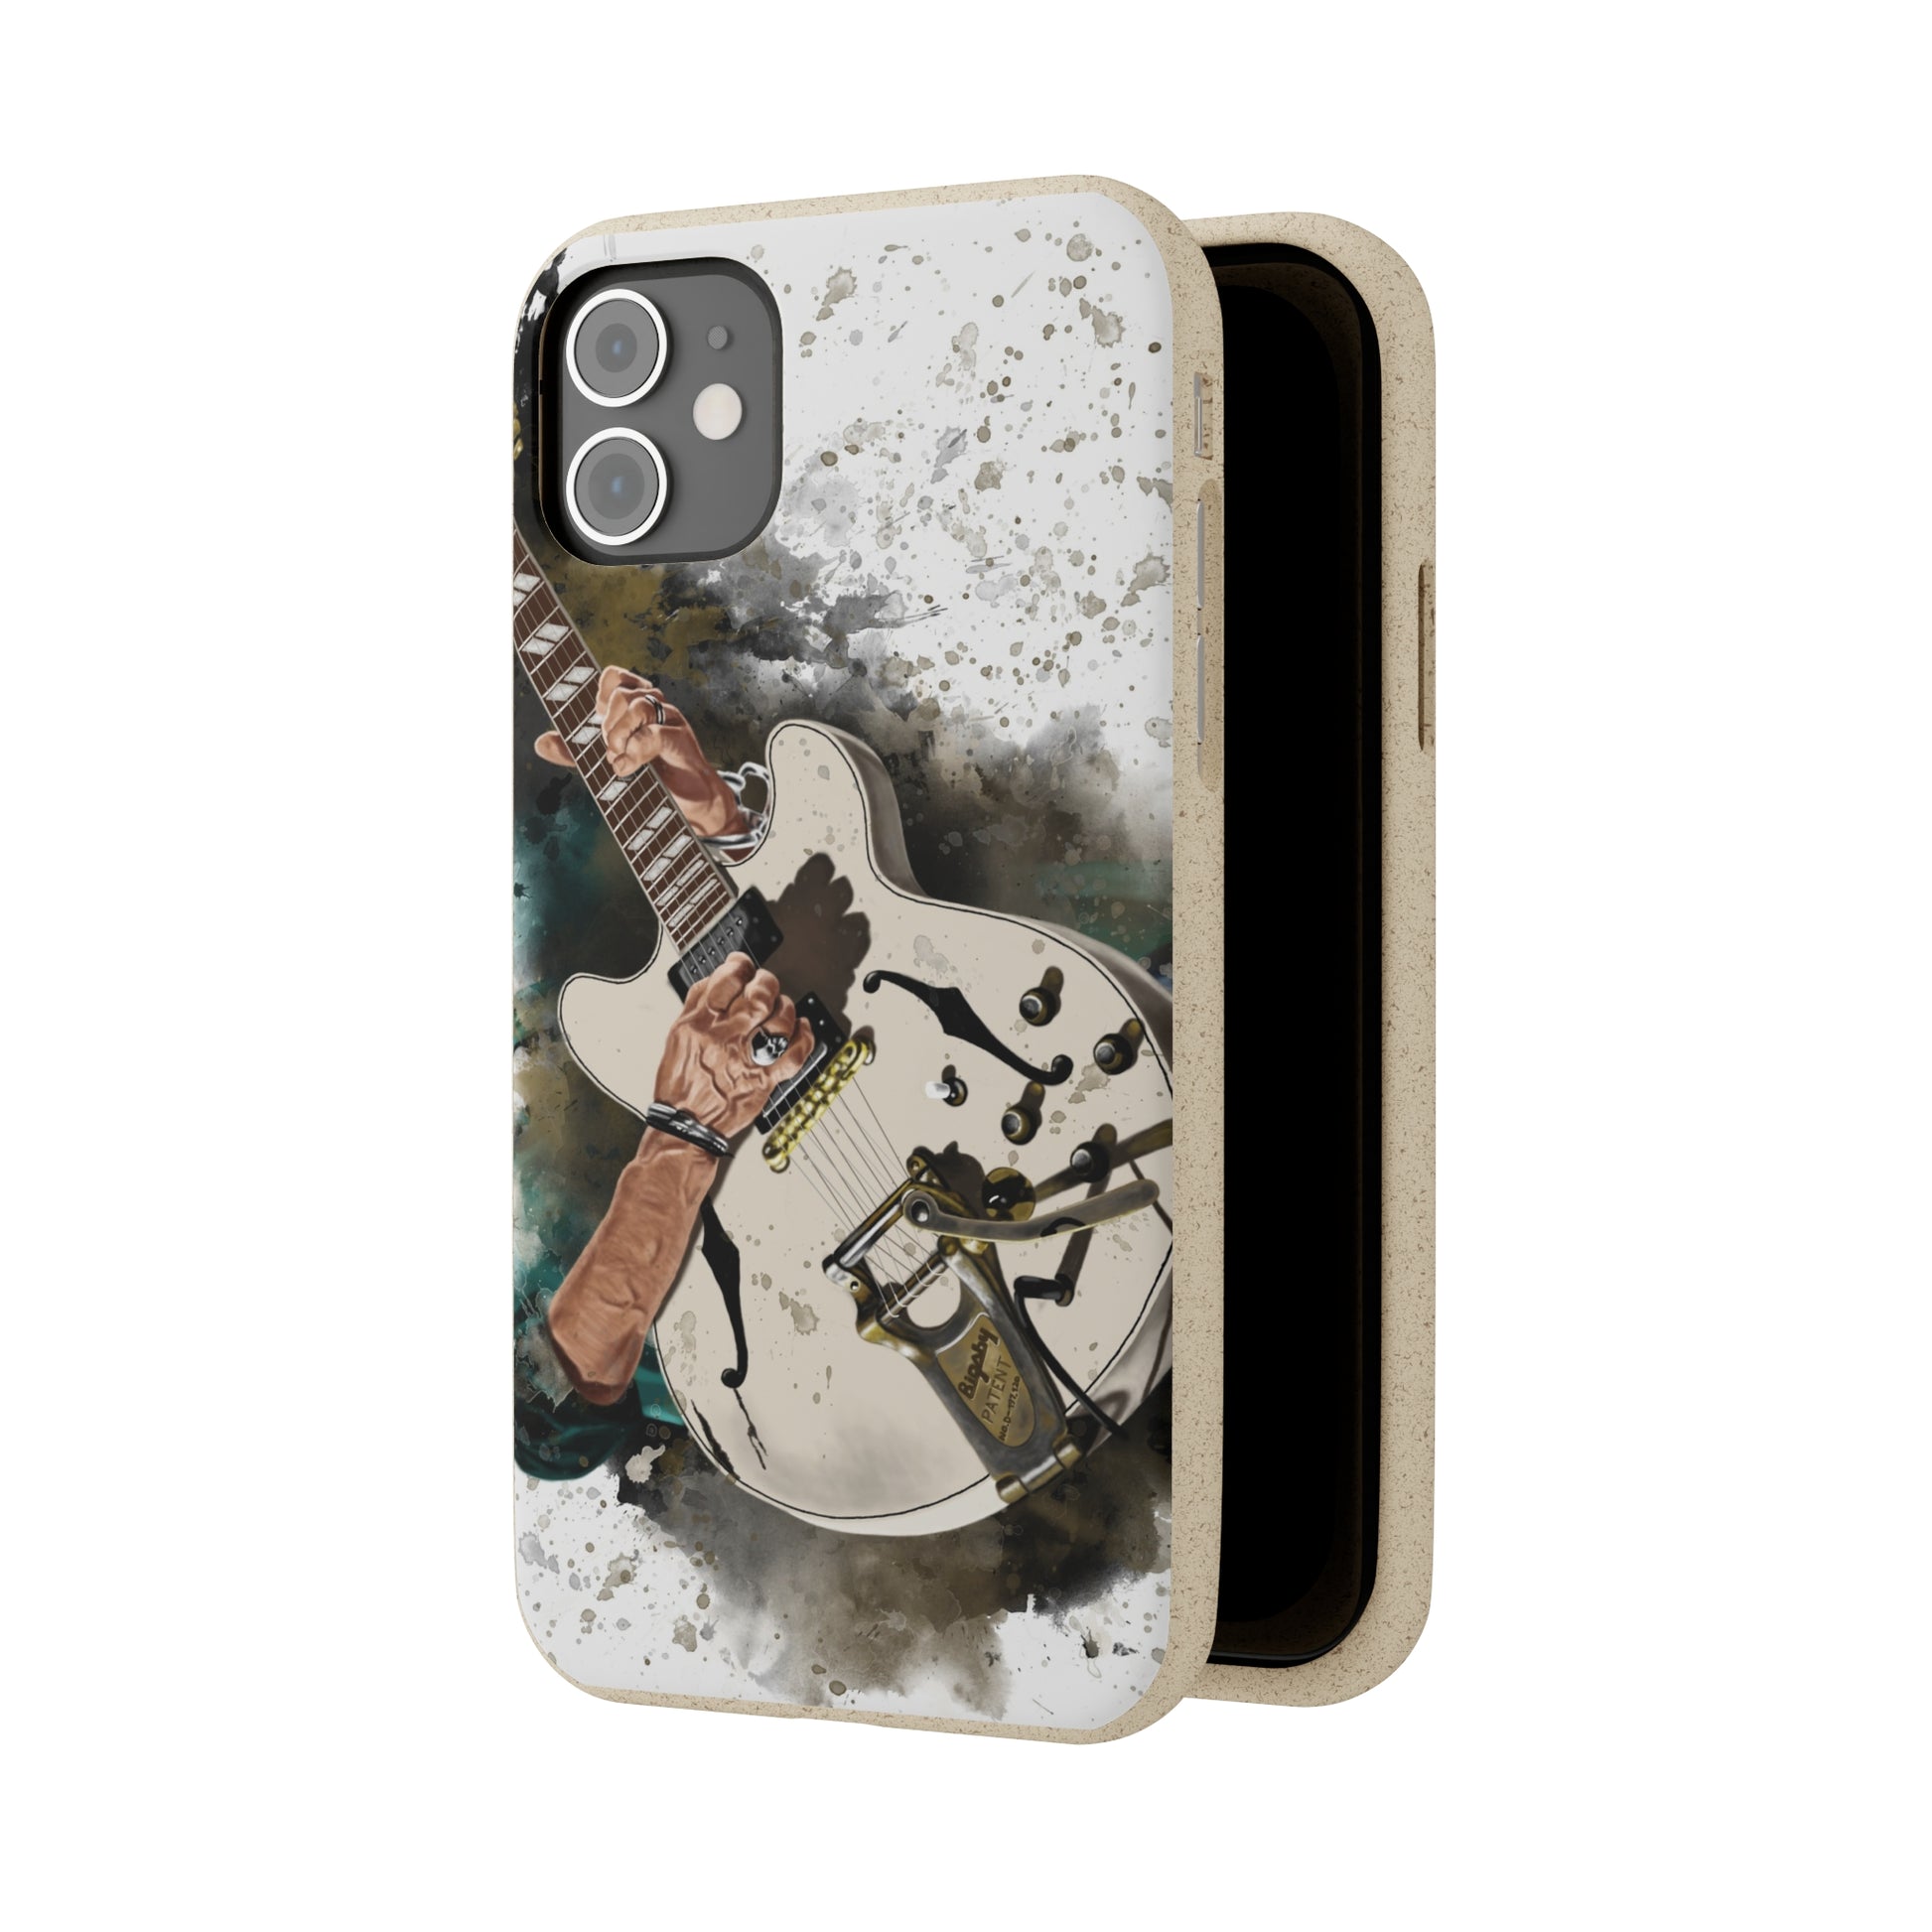 Digital painting of Pirate's electric guitar printed on biodegradable iphone phone case